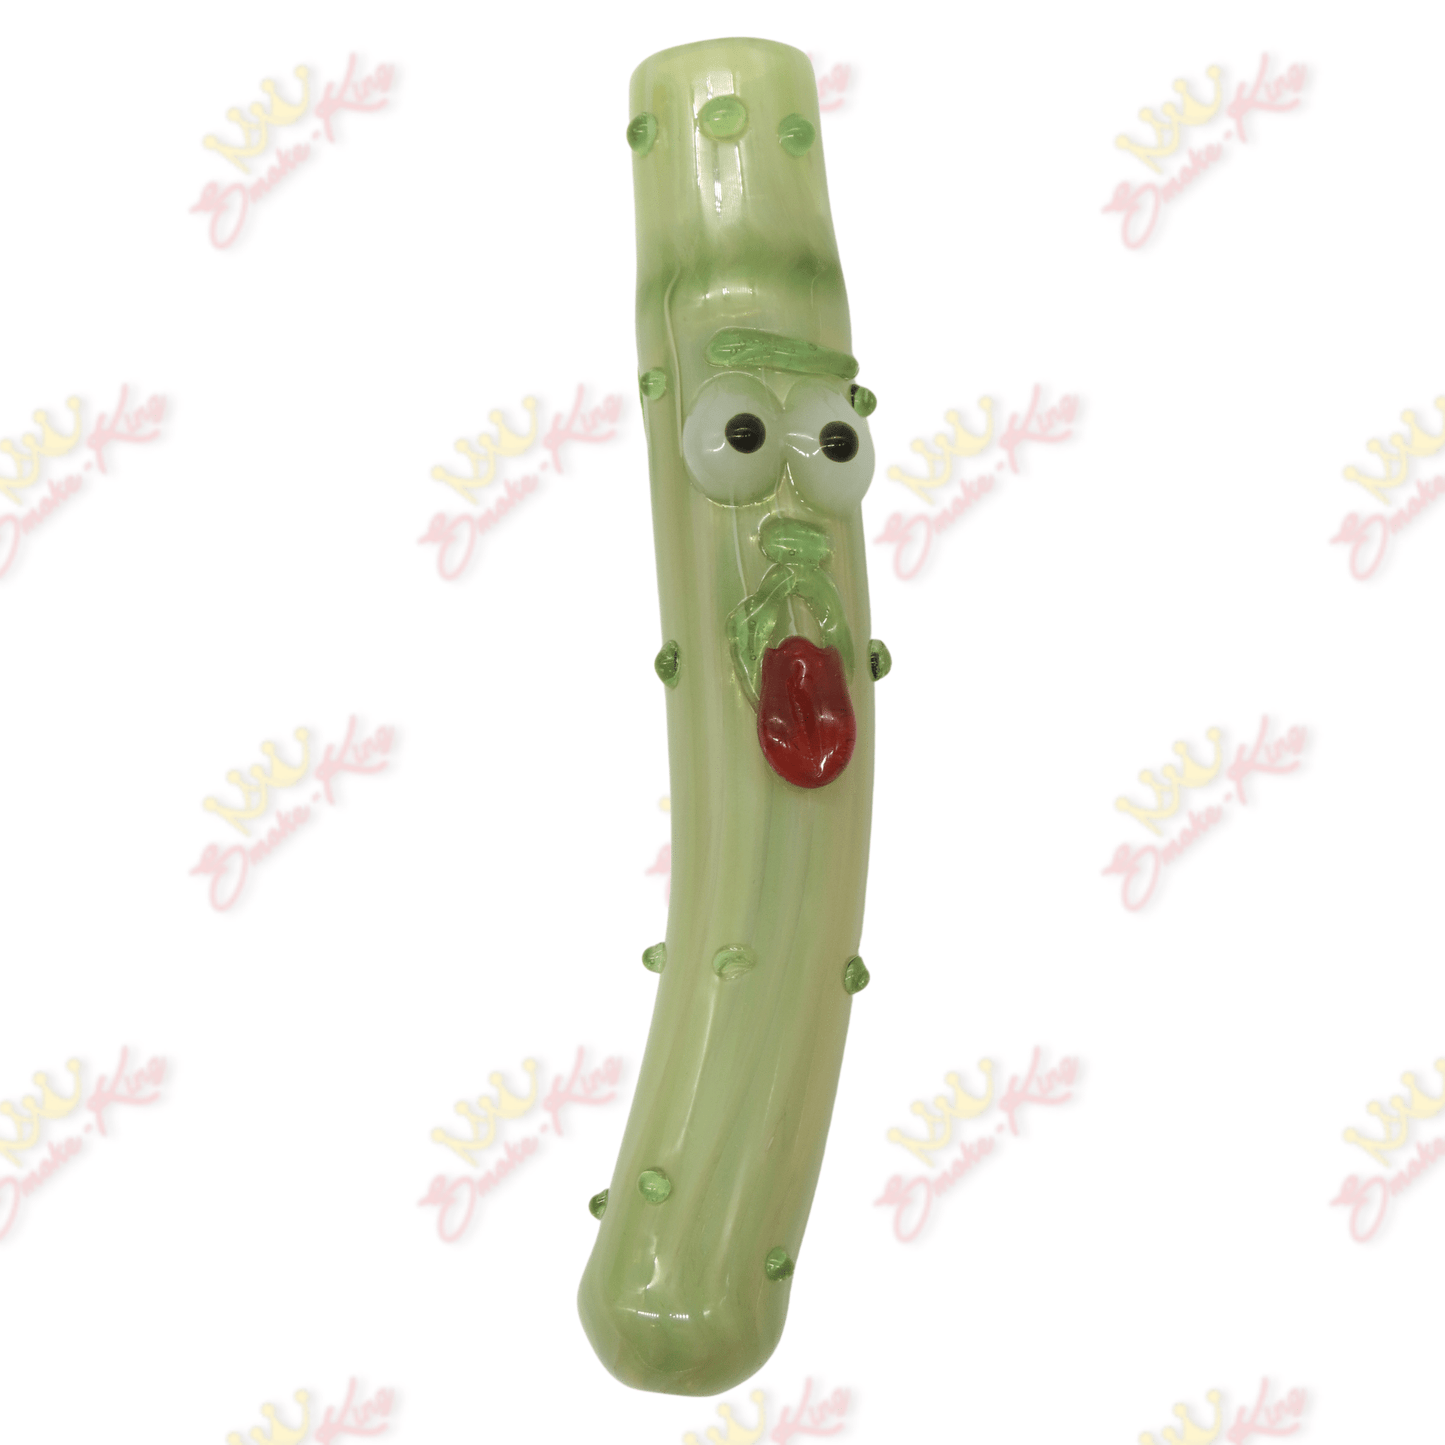 Pickle Rick Glass One hitter